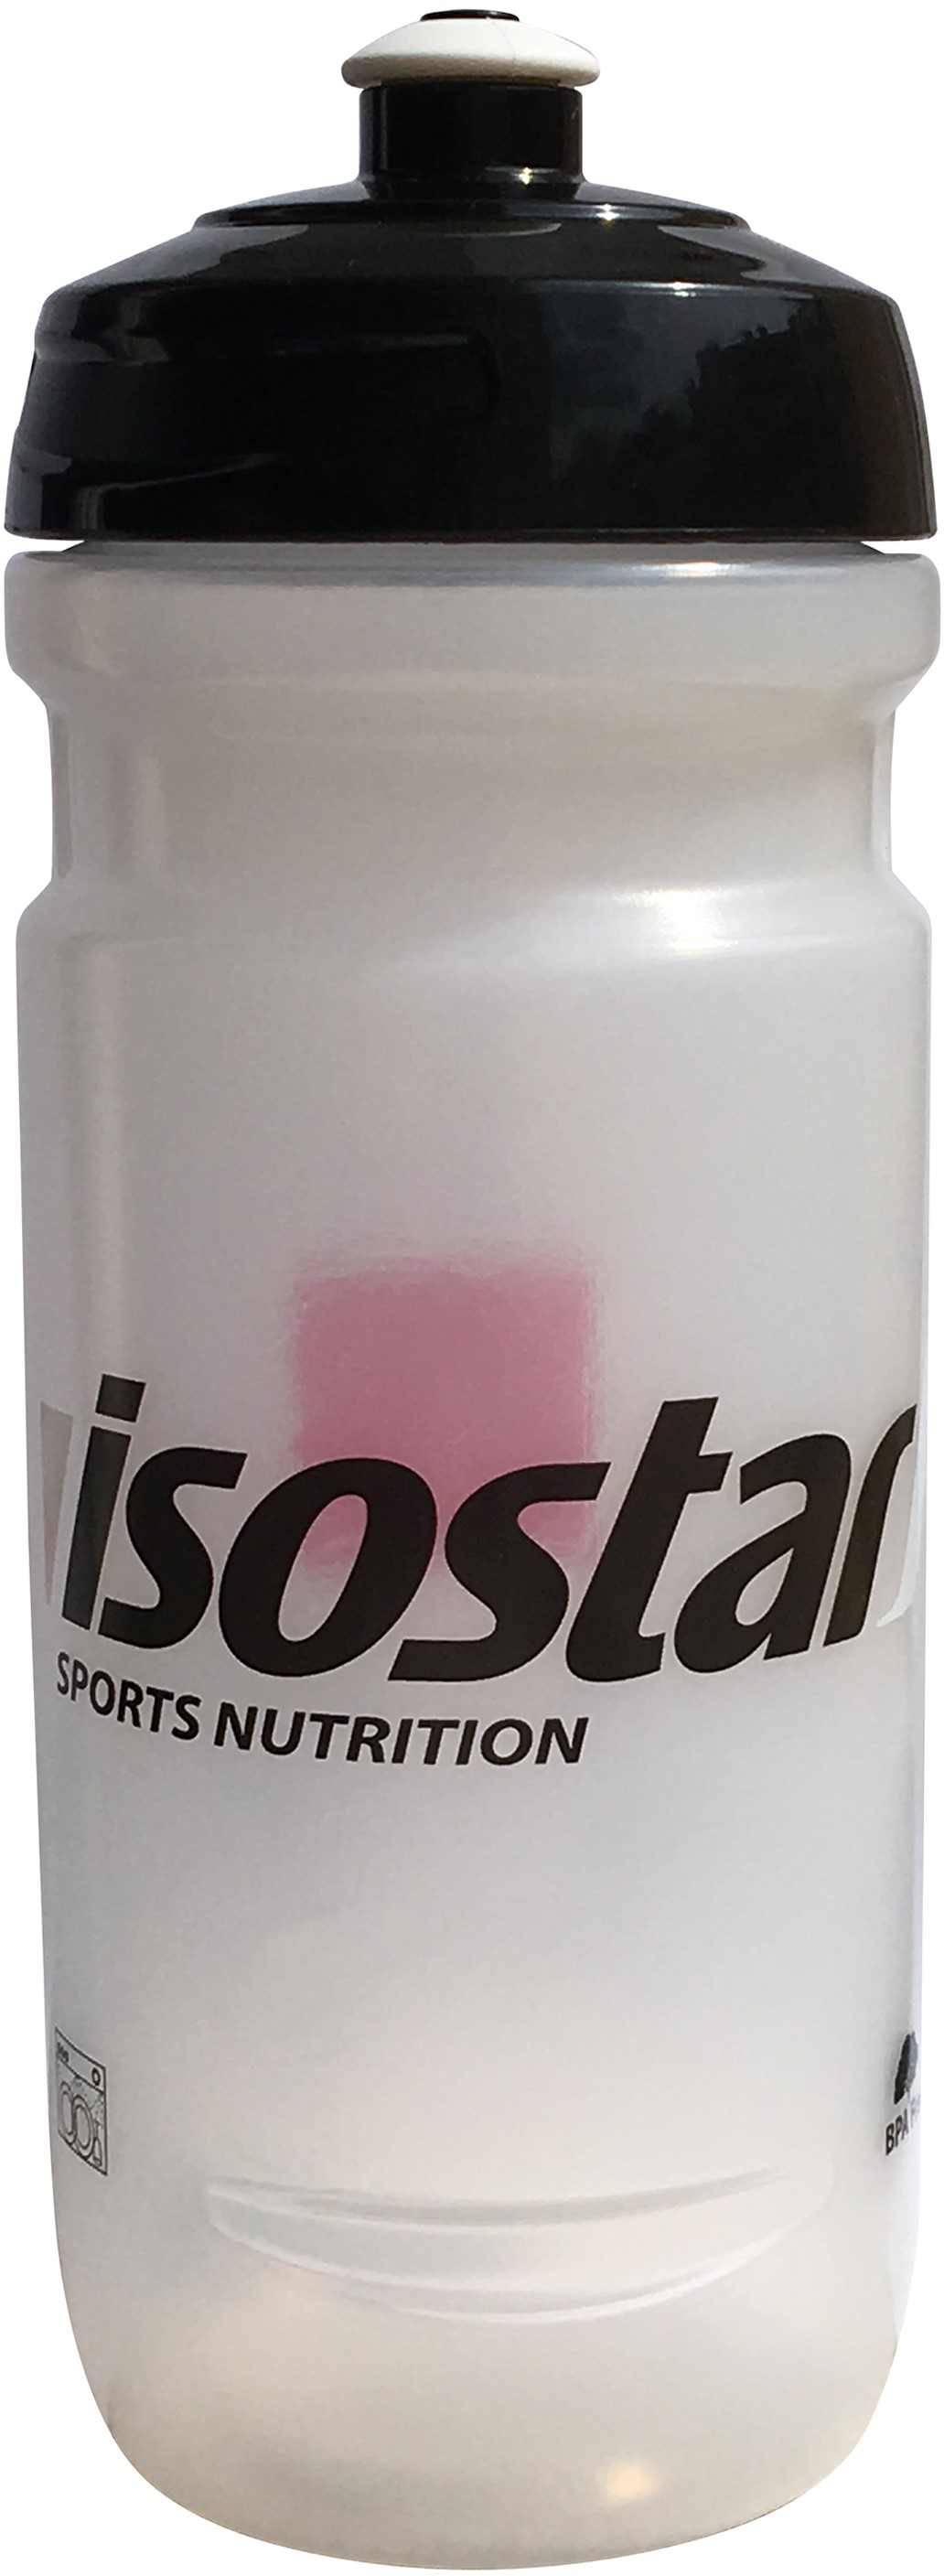 Sports bottle with a free isotonic drink